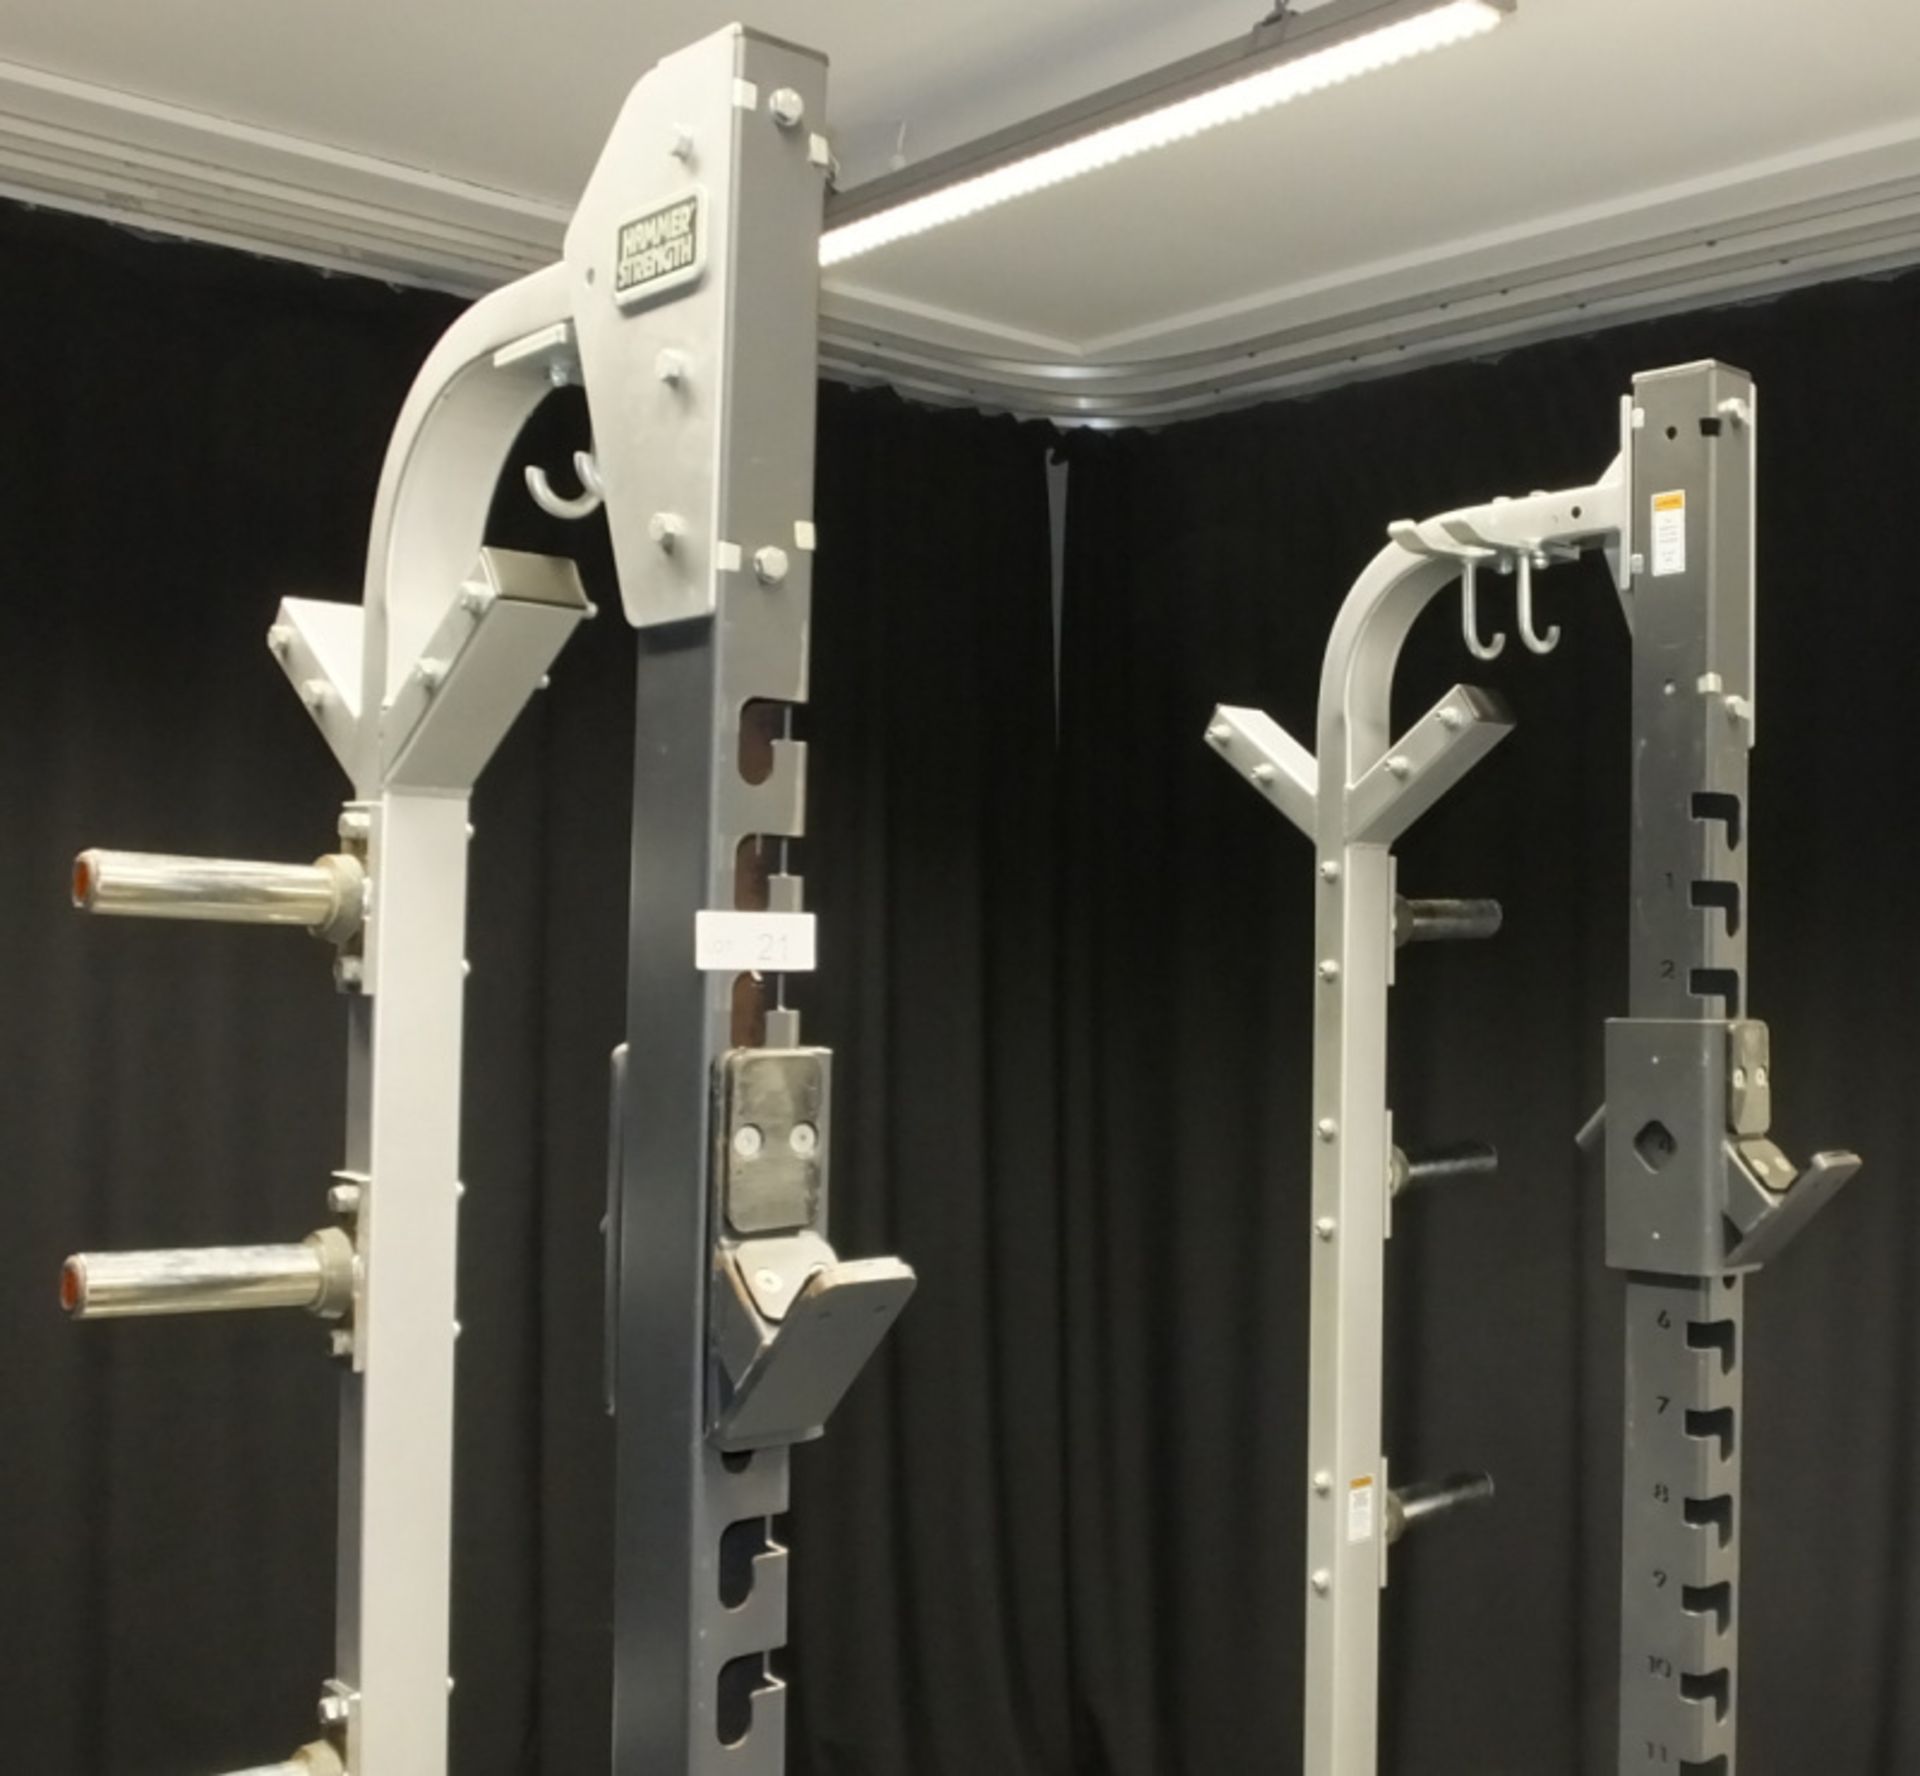 Hammer Strength Half Rack System with Kettlebell & Weight Storage - L2360 x D1460 x H2450m - Image 3 of 18